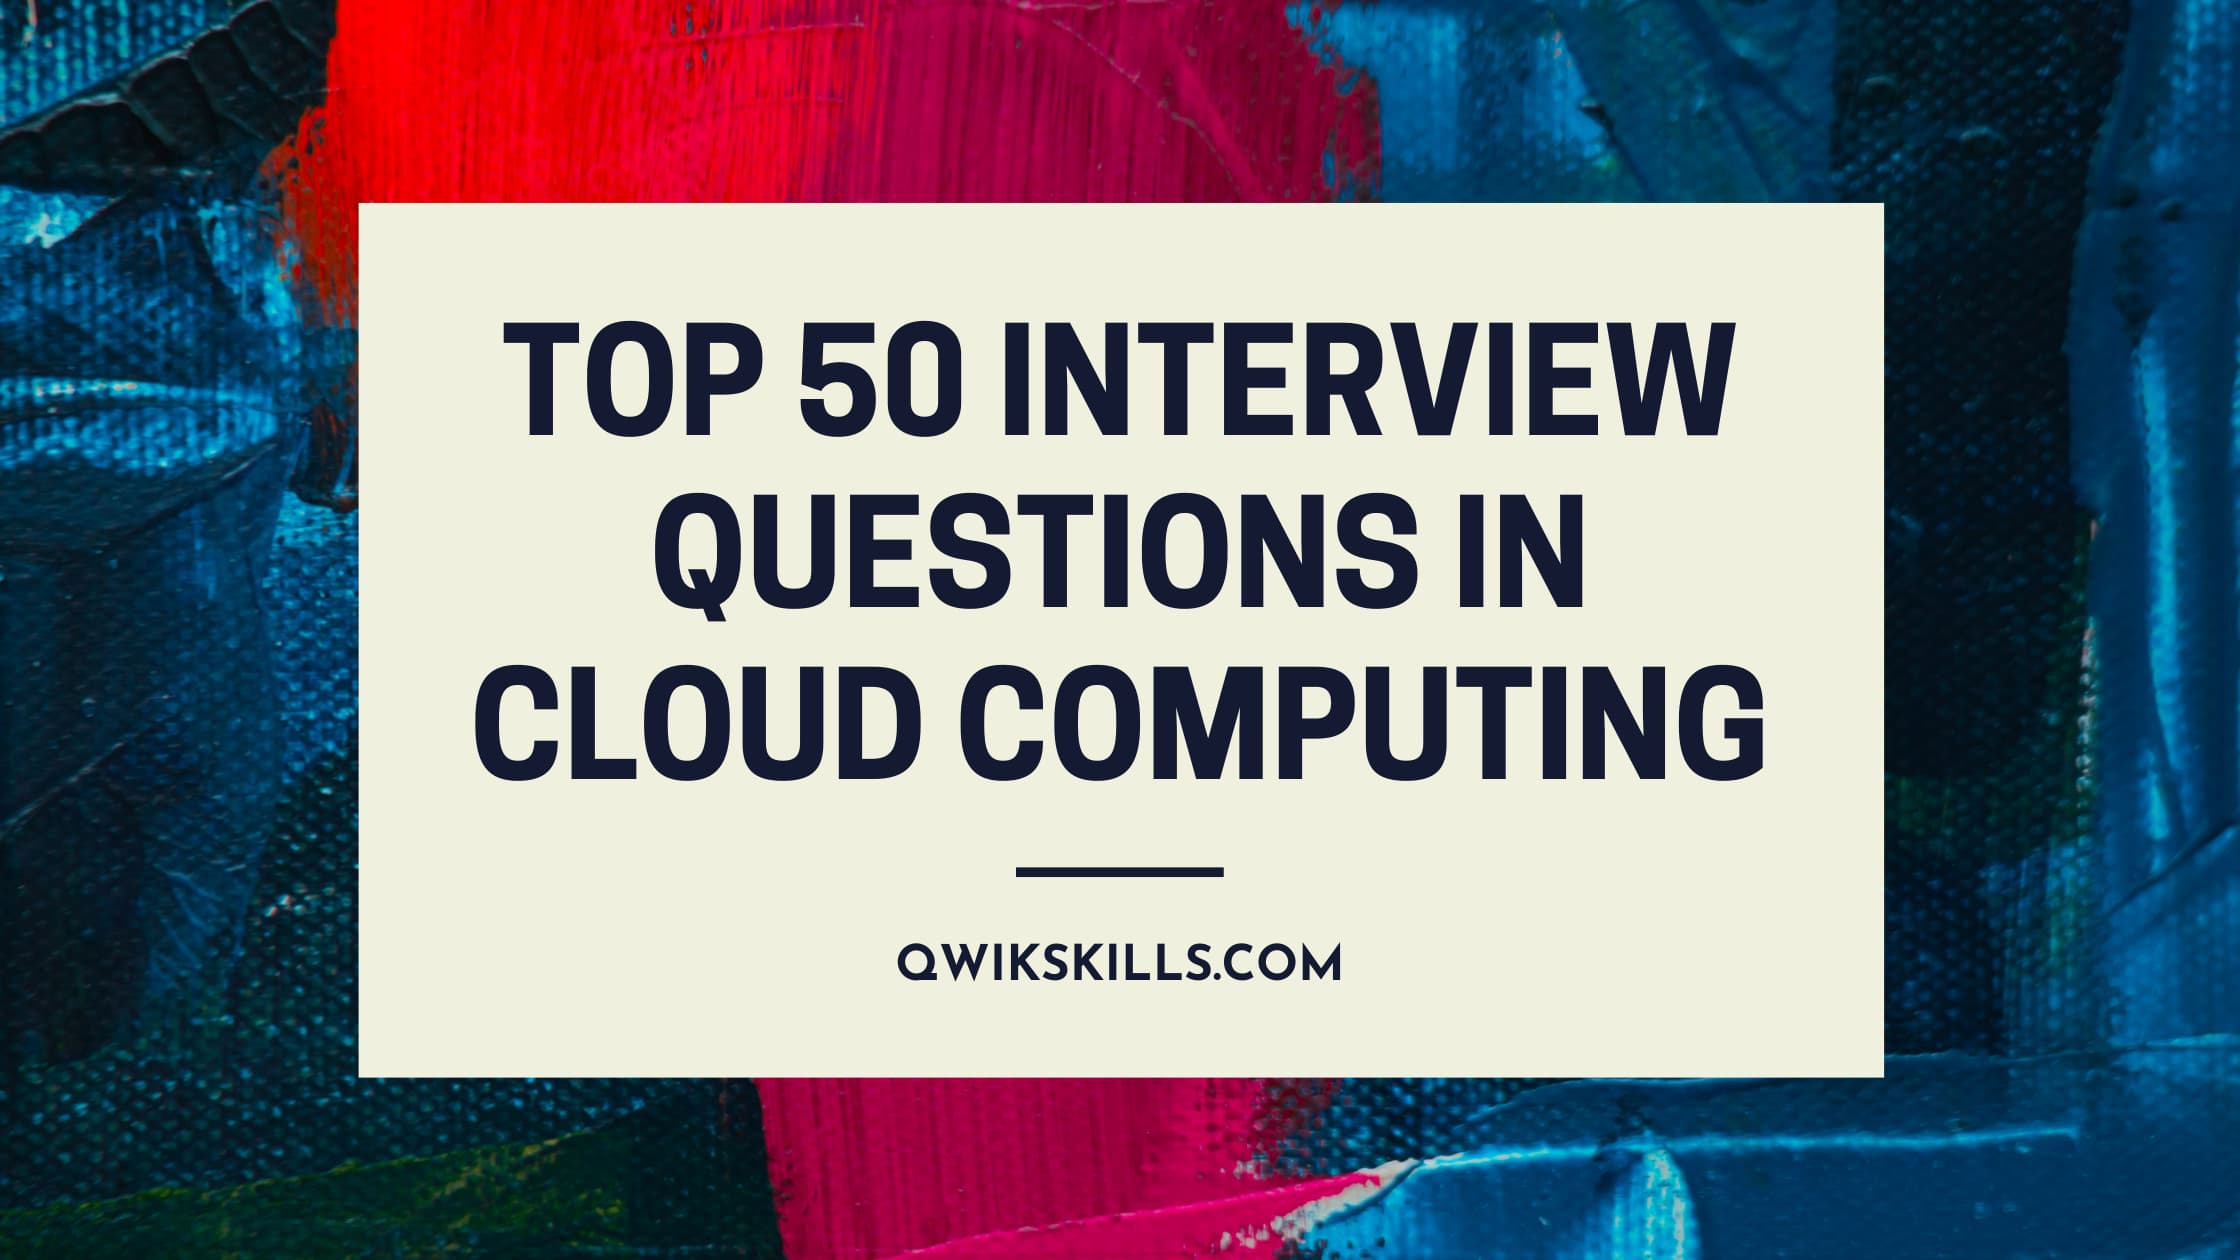 Top 50 Interview Questions for Cloud Experts